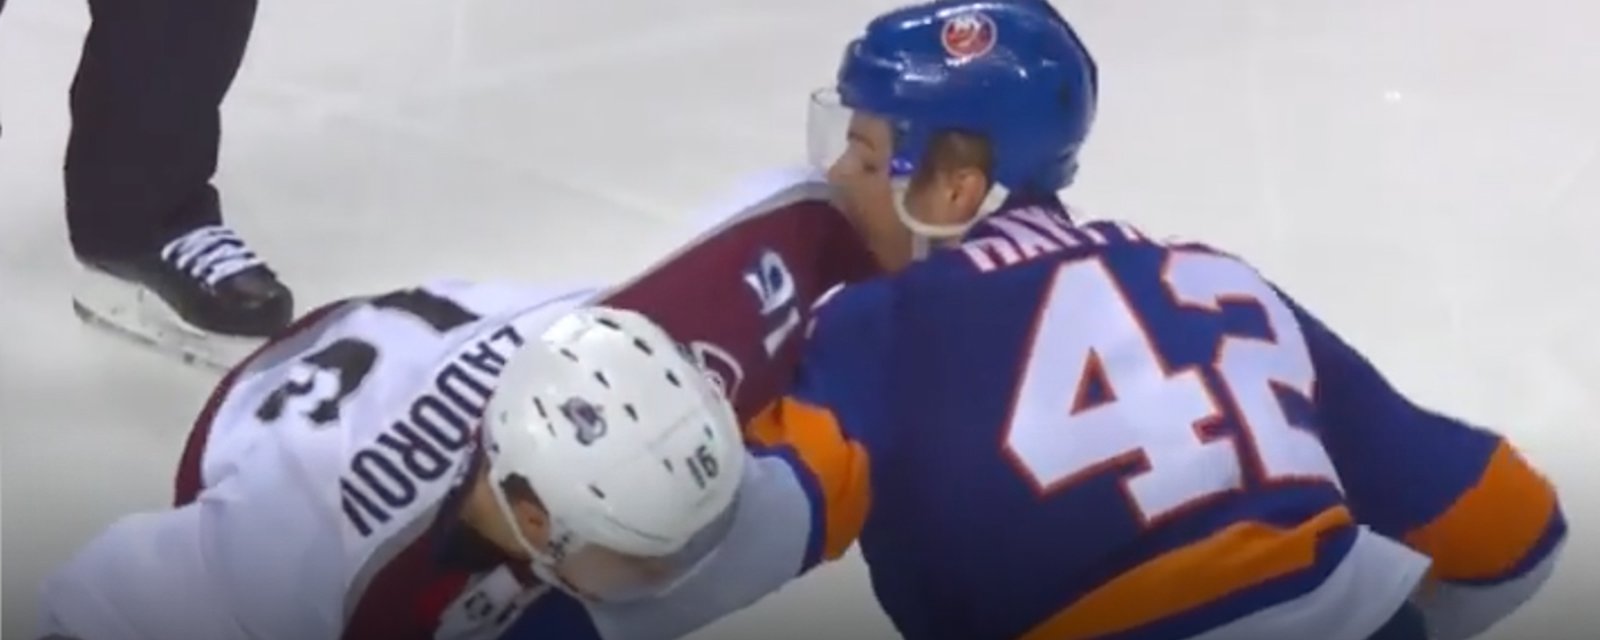 Must See: Mayfield and Zadorov throw BOMBS in heavyweight fight